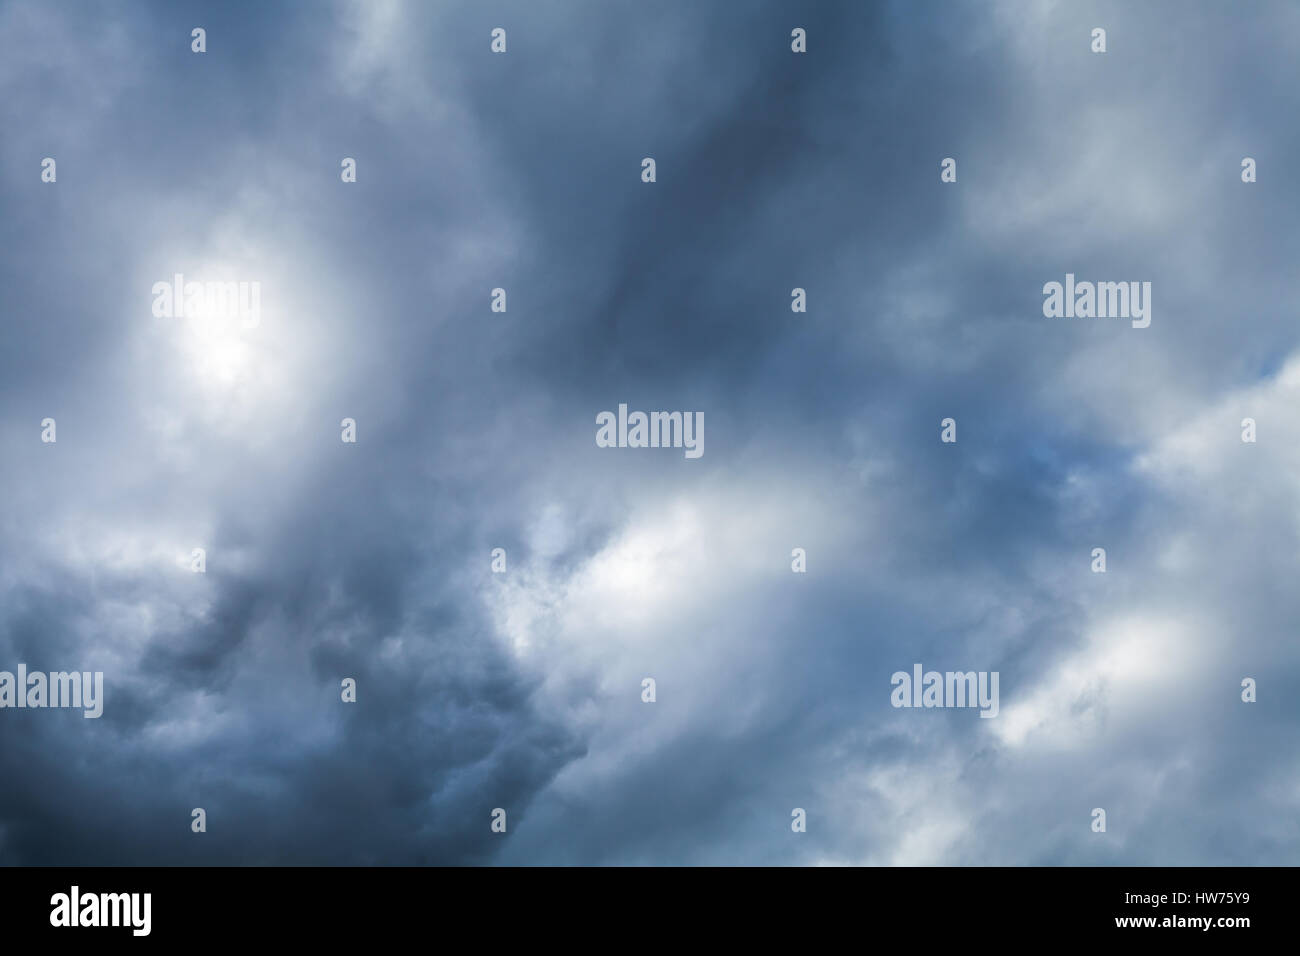 Dark dramatic sky with stormy clouds, abstract nature background photo Stock Photo